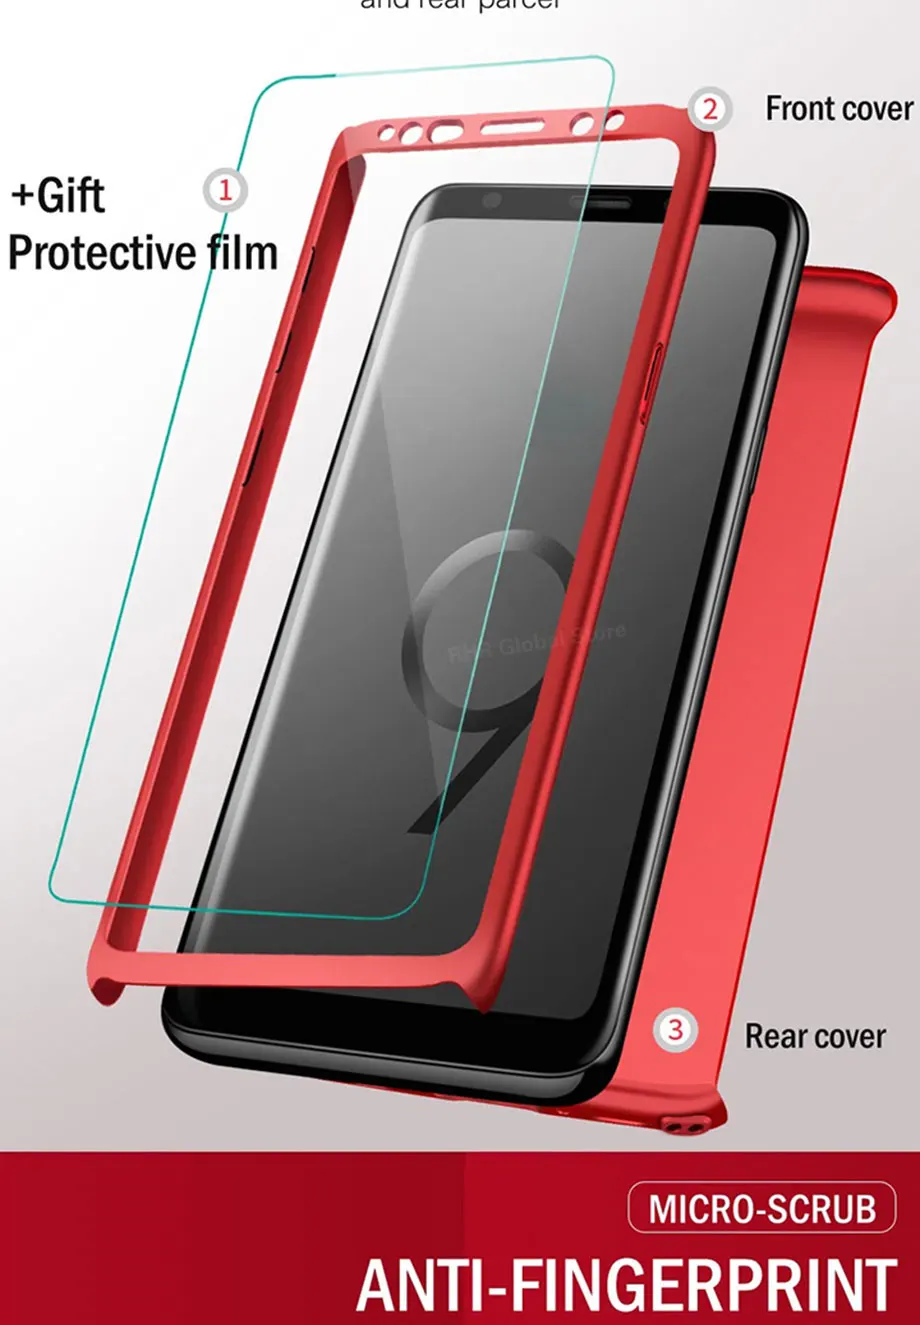 

360 Full Cover phone Case For Samsung Galaxy A6 A7 A8 A9 J4 J6 J8 Note 5 8 9 10 S6 S7 S8 S9 S10 Lite Pro Plus Edge 2018 Case